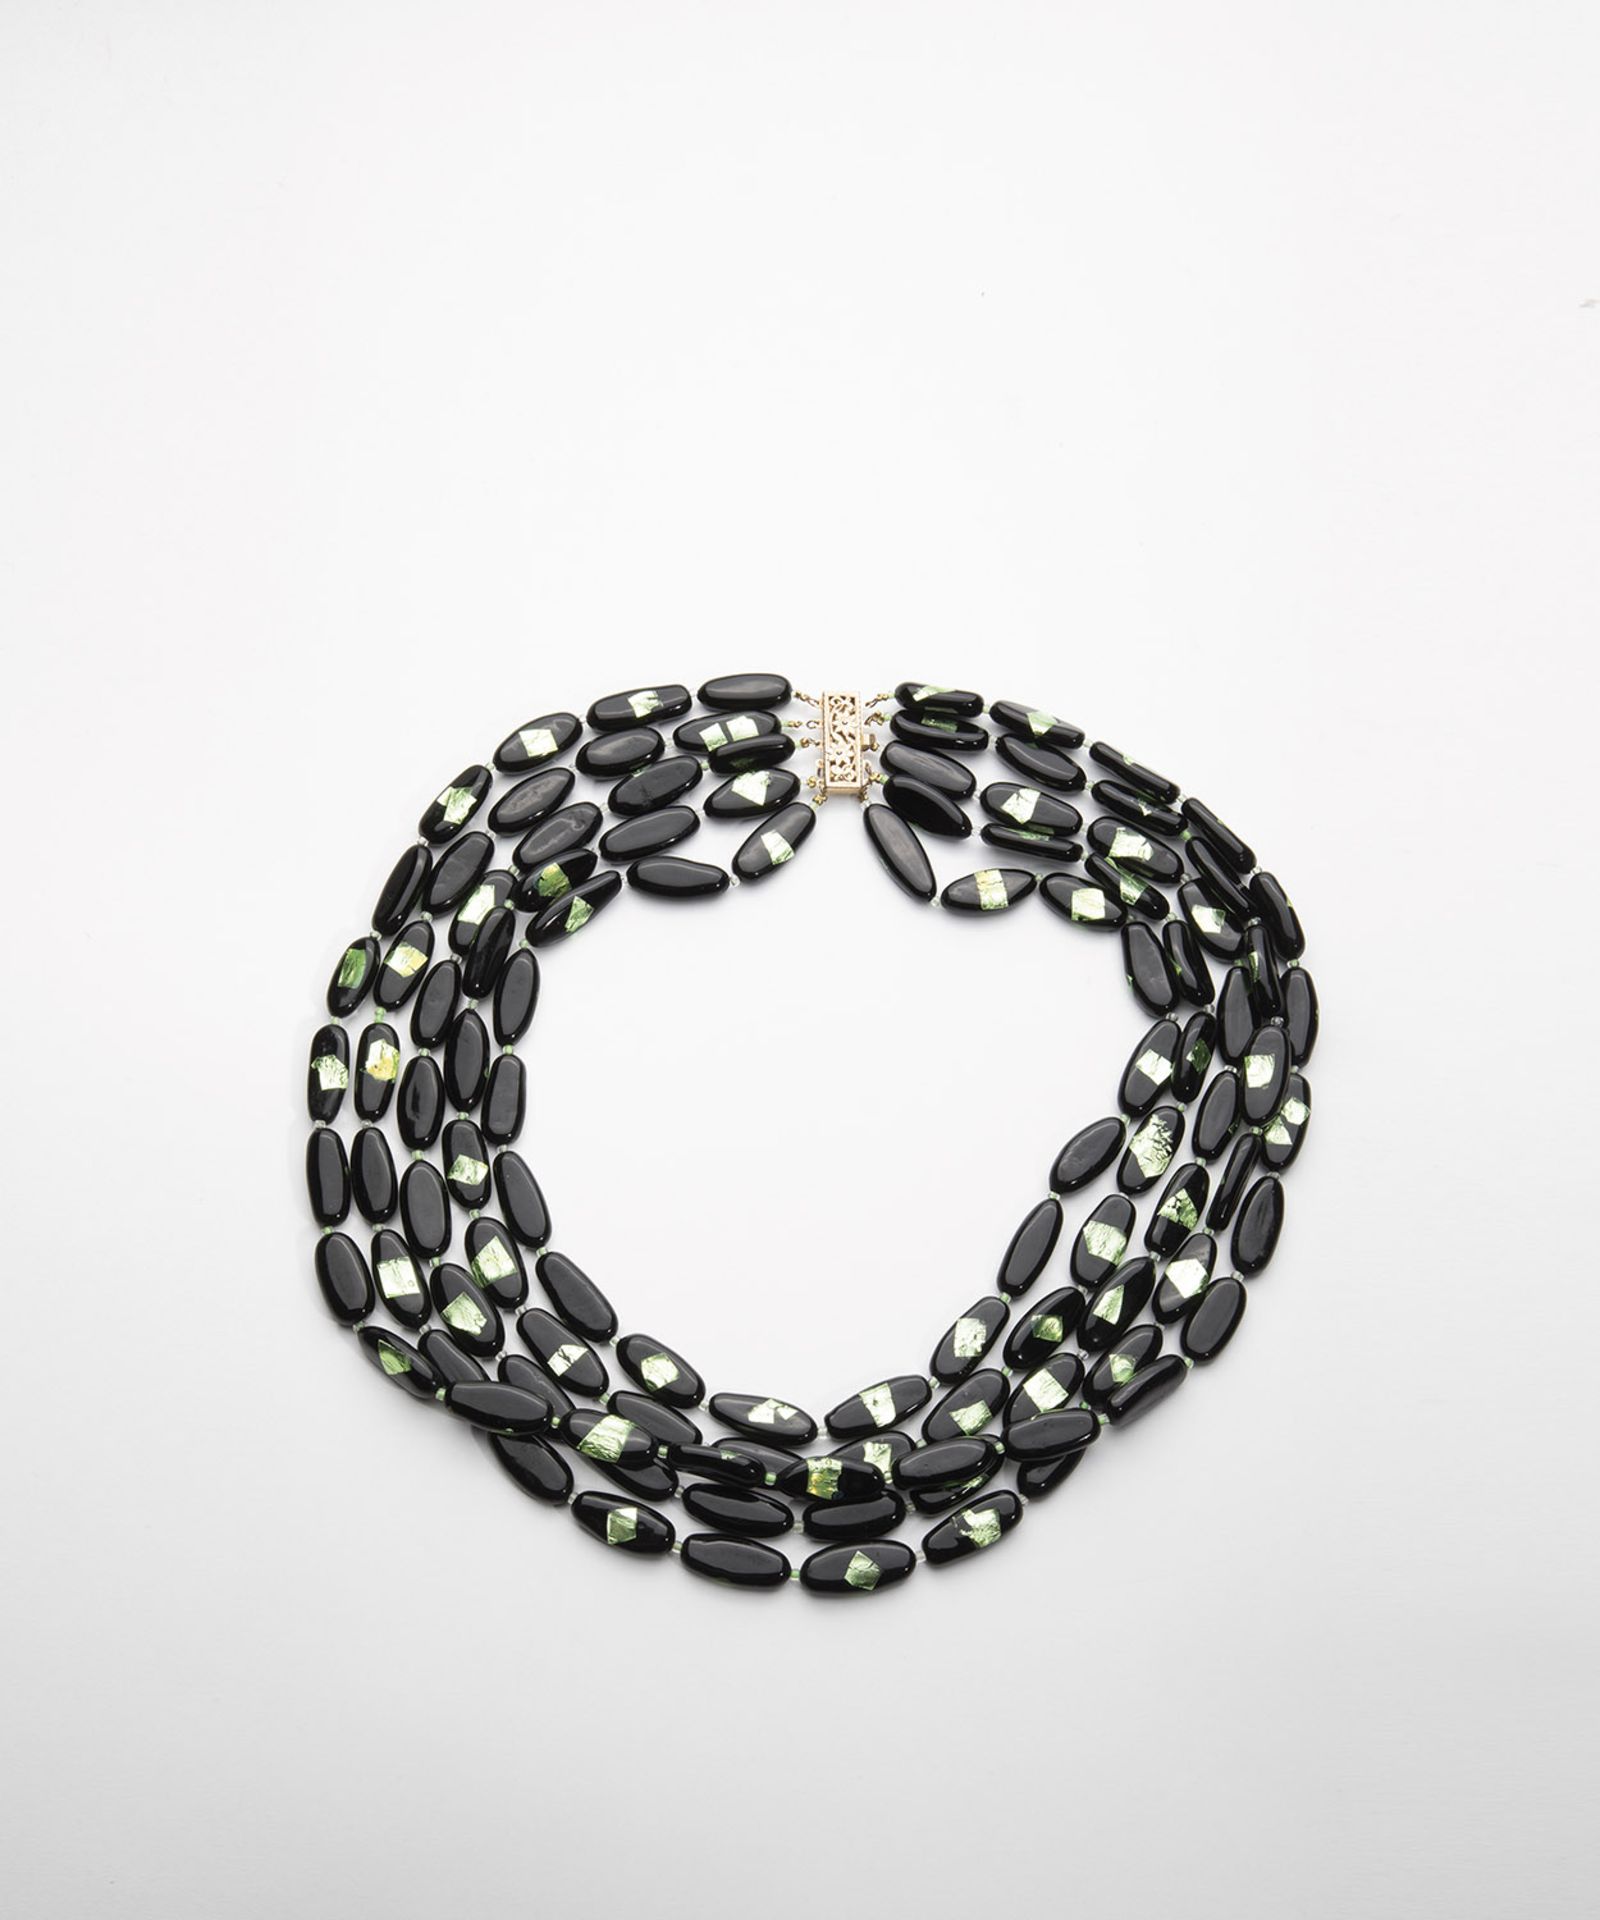 Five-row glass necklace